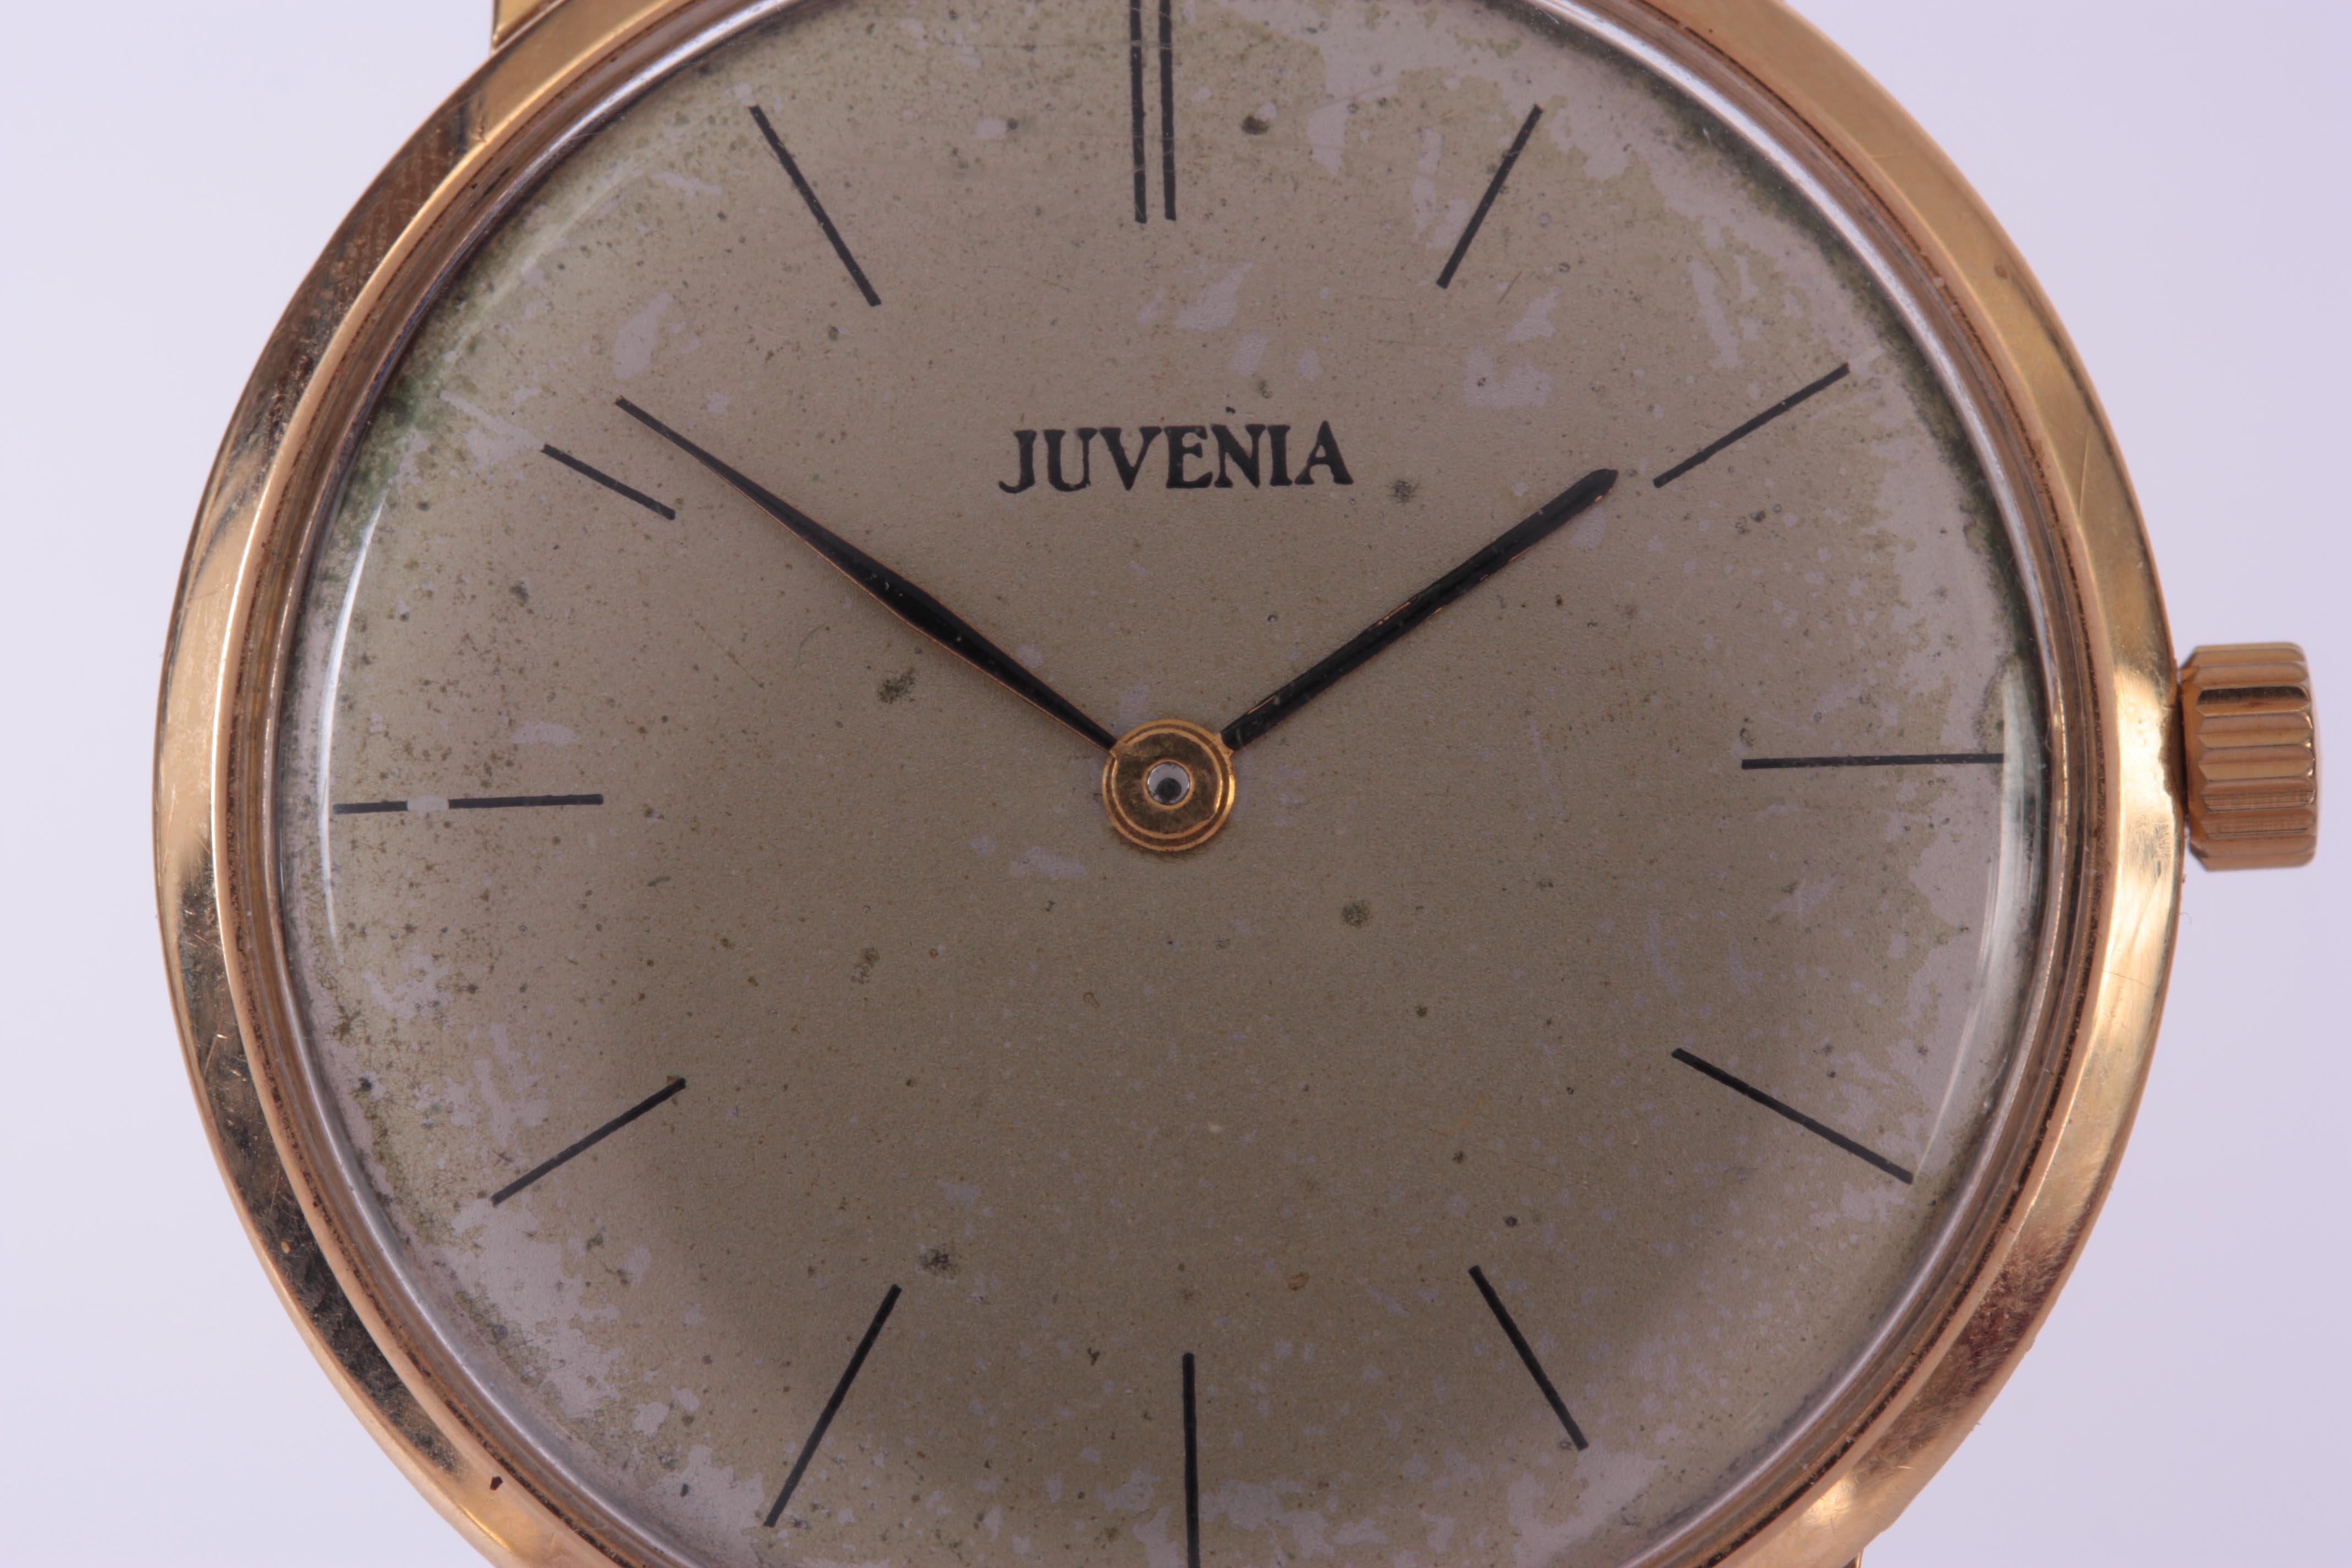 A GENTLEMAN'S 18K GOLD JUVENIA WRIST WATCH on brown leather strap, the gold case enclosing a - Image 2 of 7